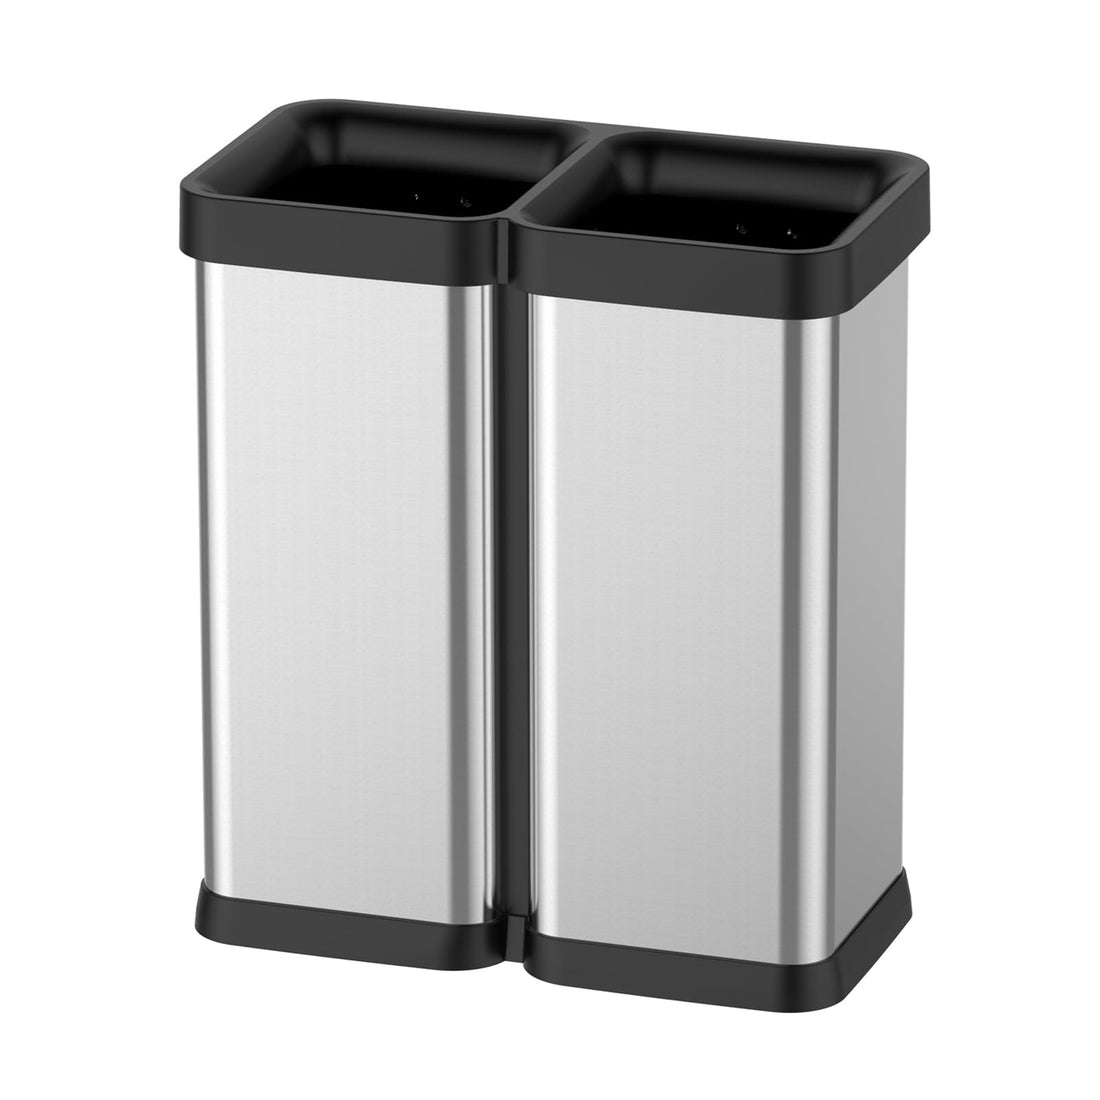 2x7.9 Gallon Kitchen Trash Can, Dual Compartment Waste Bins, Open Top, No Lid Stainless Steel Trash Bin for Kitchen, Office, Restaurant